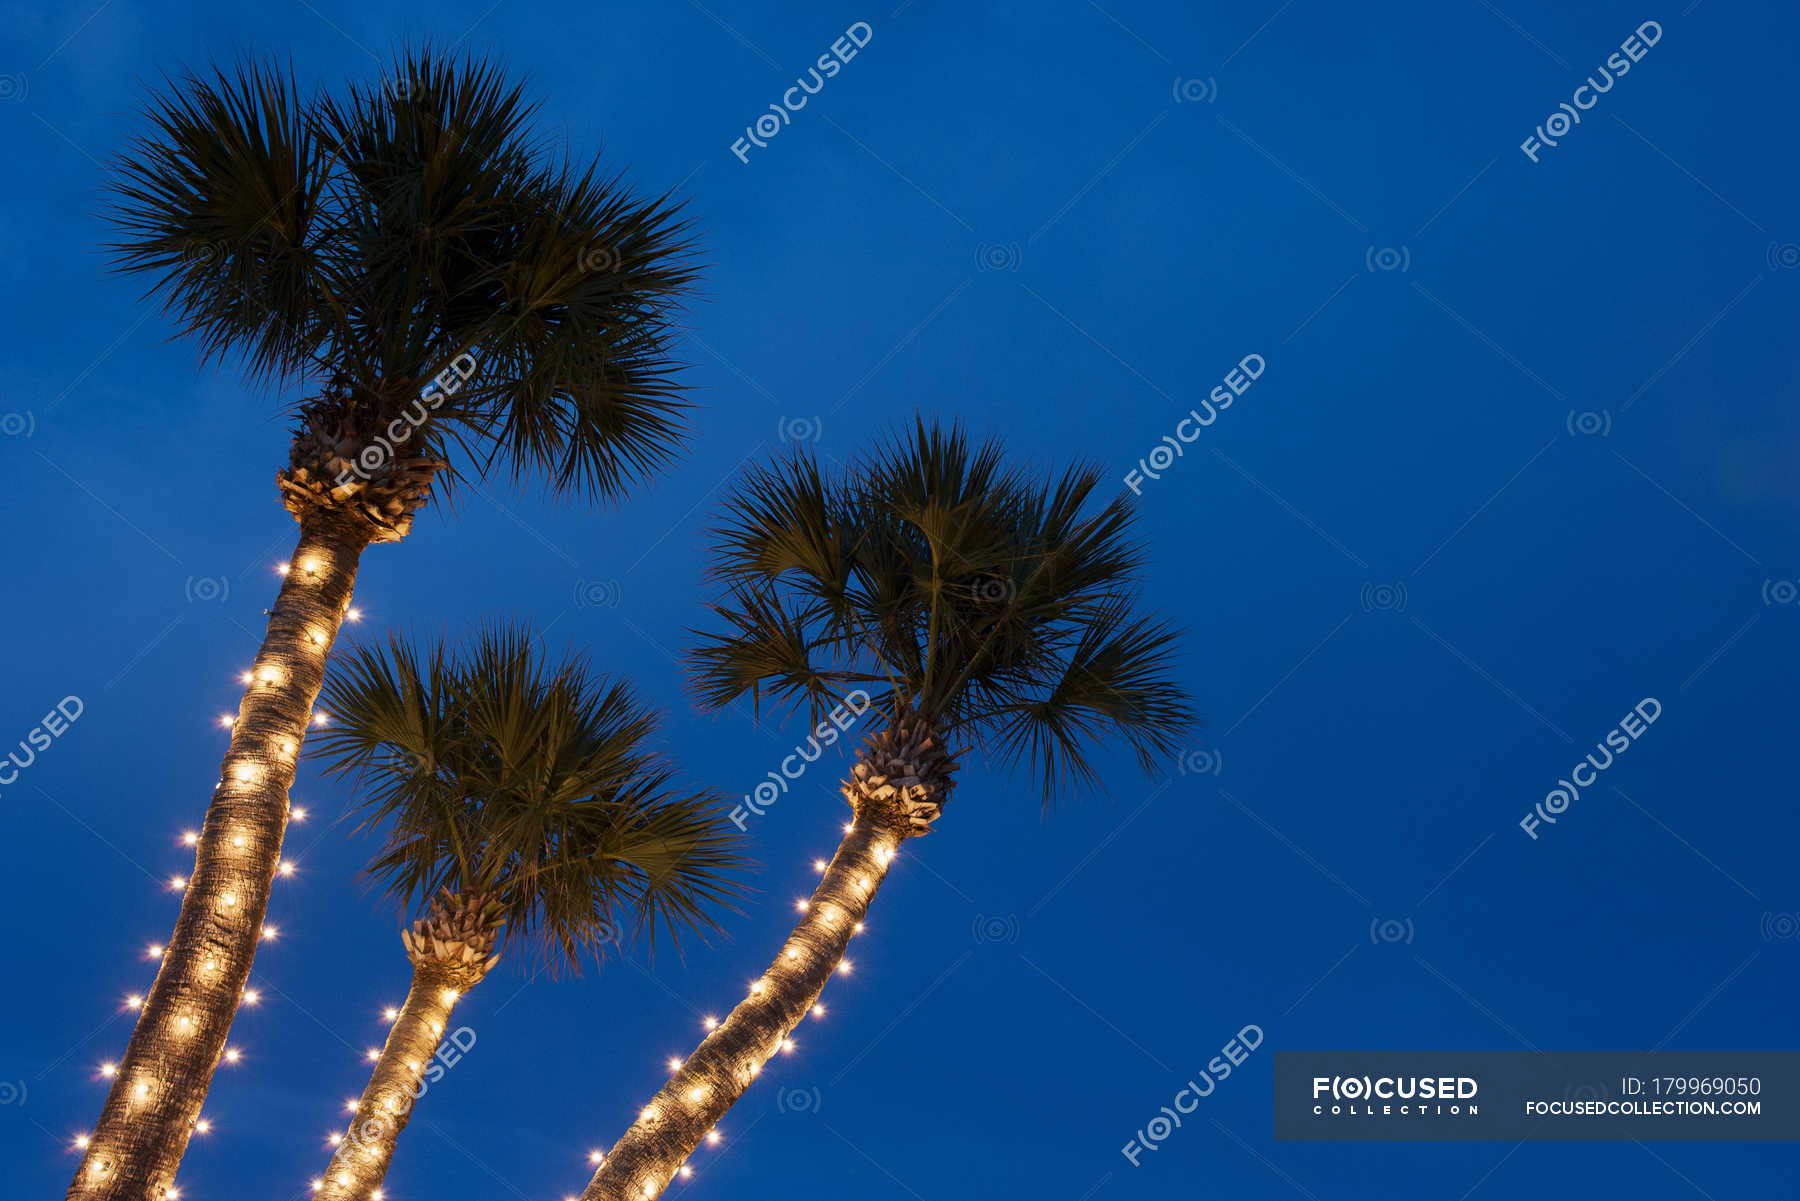 Palm Trees Decorated With Christmas Lights Celebration Nighttime Stock Photo 179969050